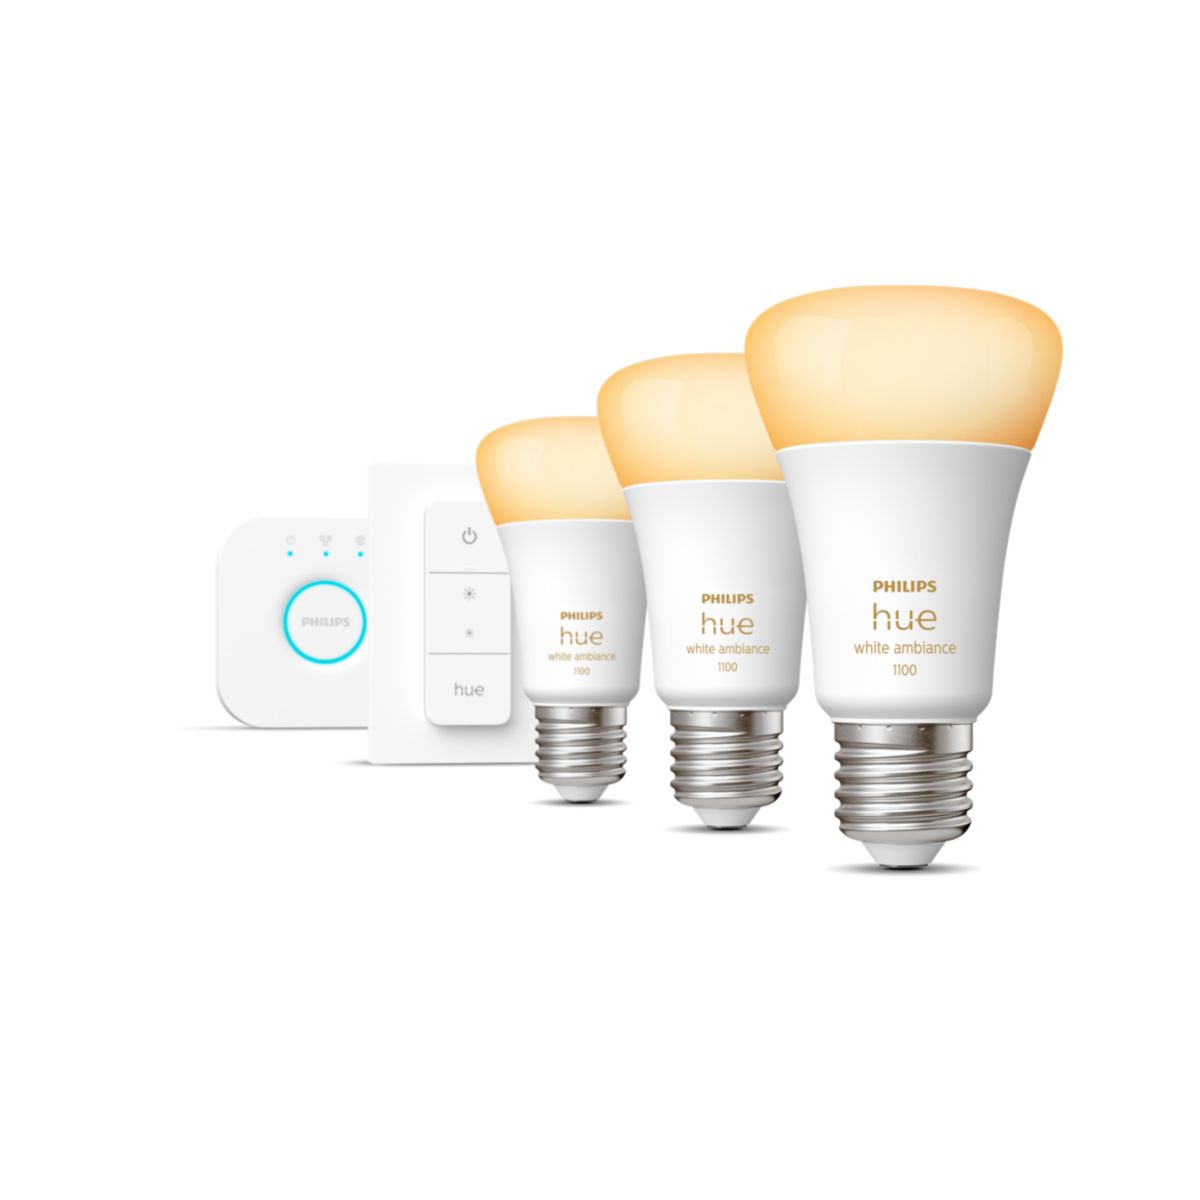 Philips Hue starterkit e27 ambiance white 1100lm 3x + dimmer switch